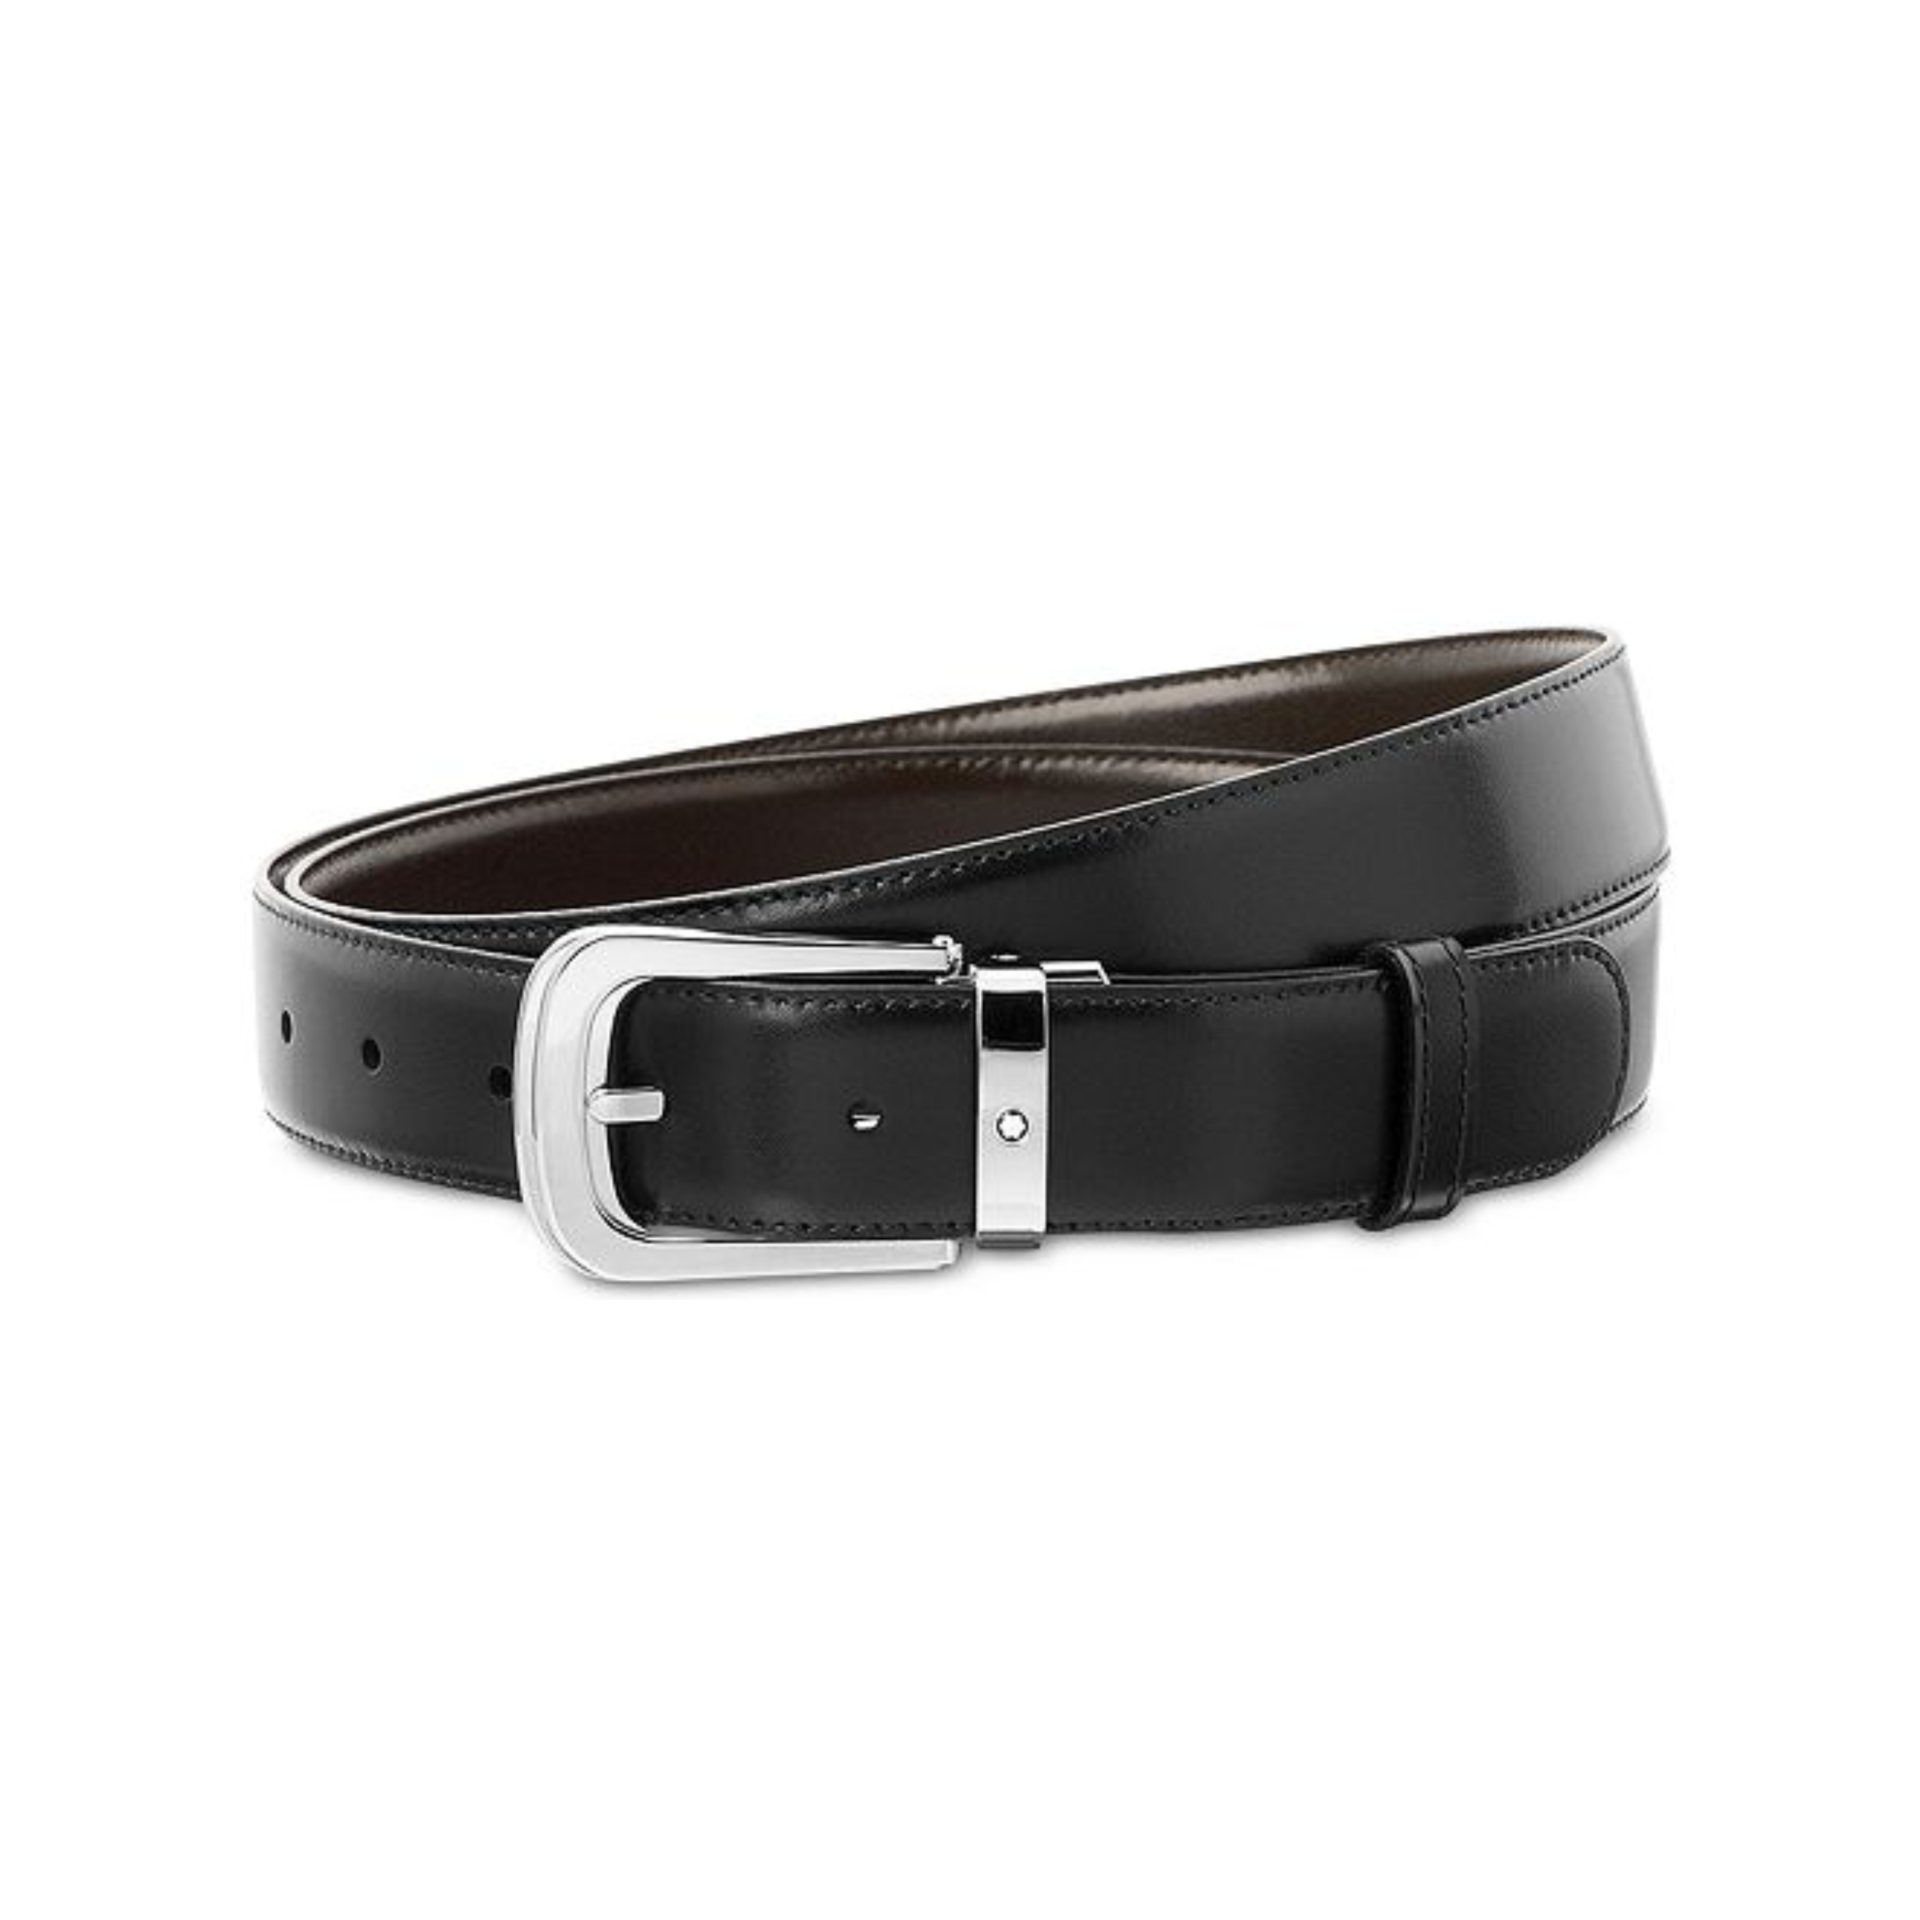 Montblanc Belt - Stainless Steel Buckle & Reversible Strap